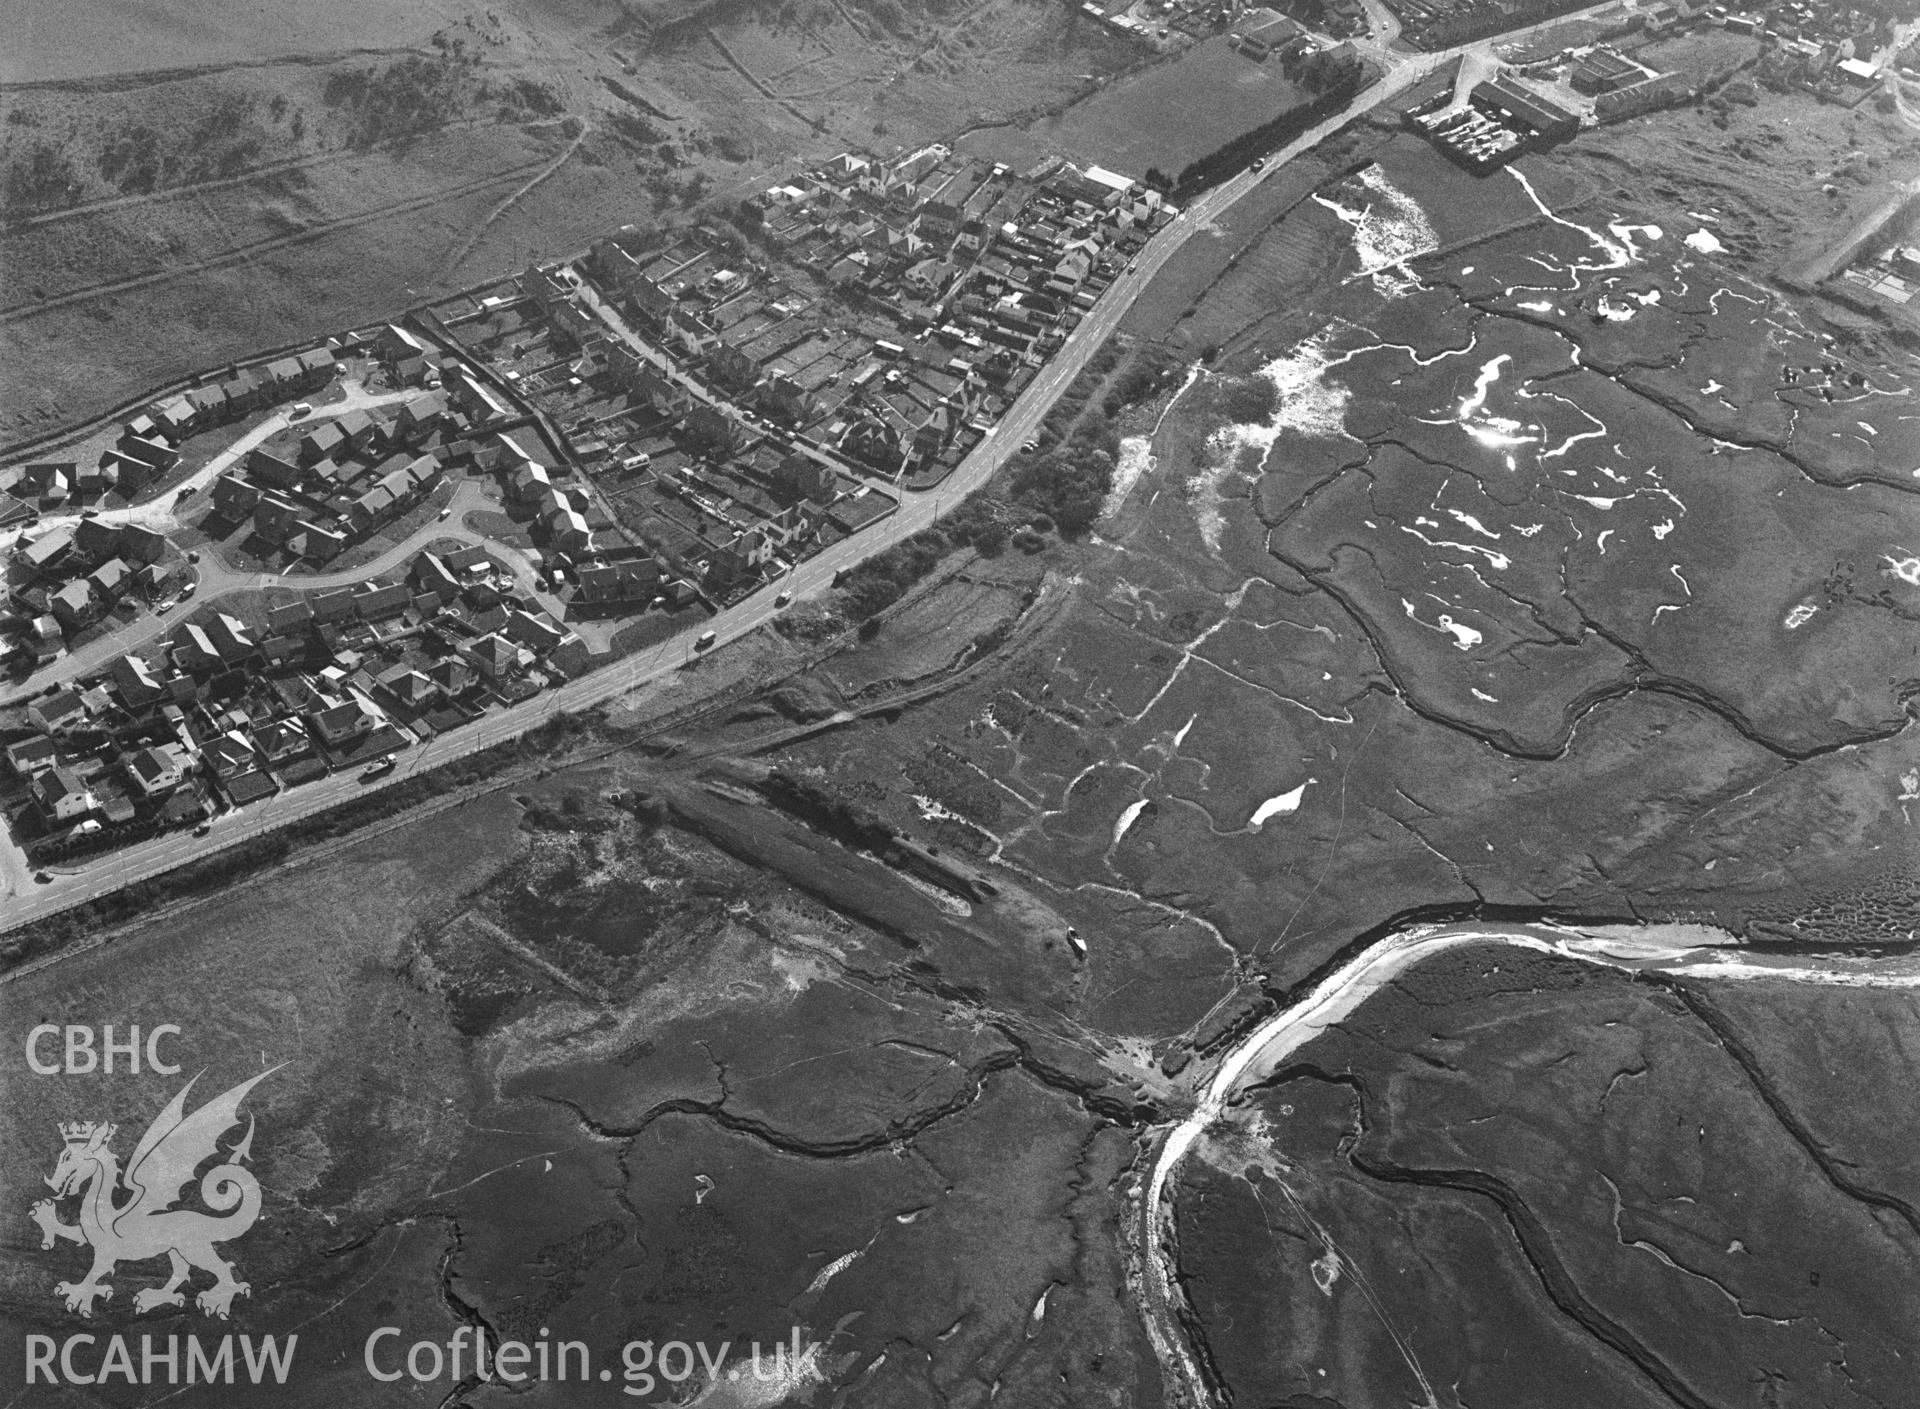 RCAHMW Black and white oblique aerial photograph of Pen-clawdd, Llanrhidian Higher, taken on 25/03/1991 by CR Musson